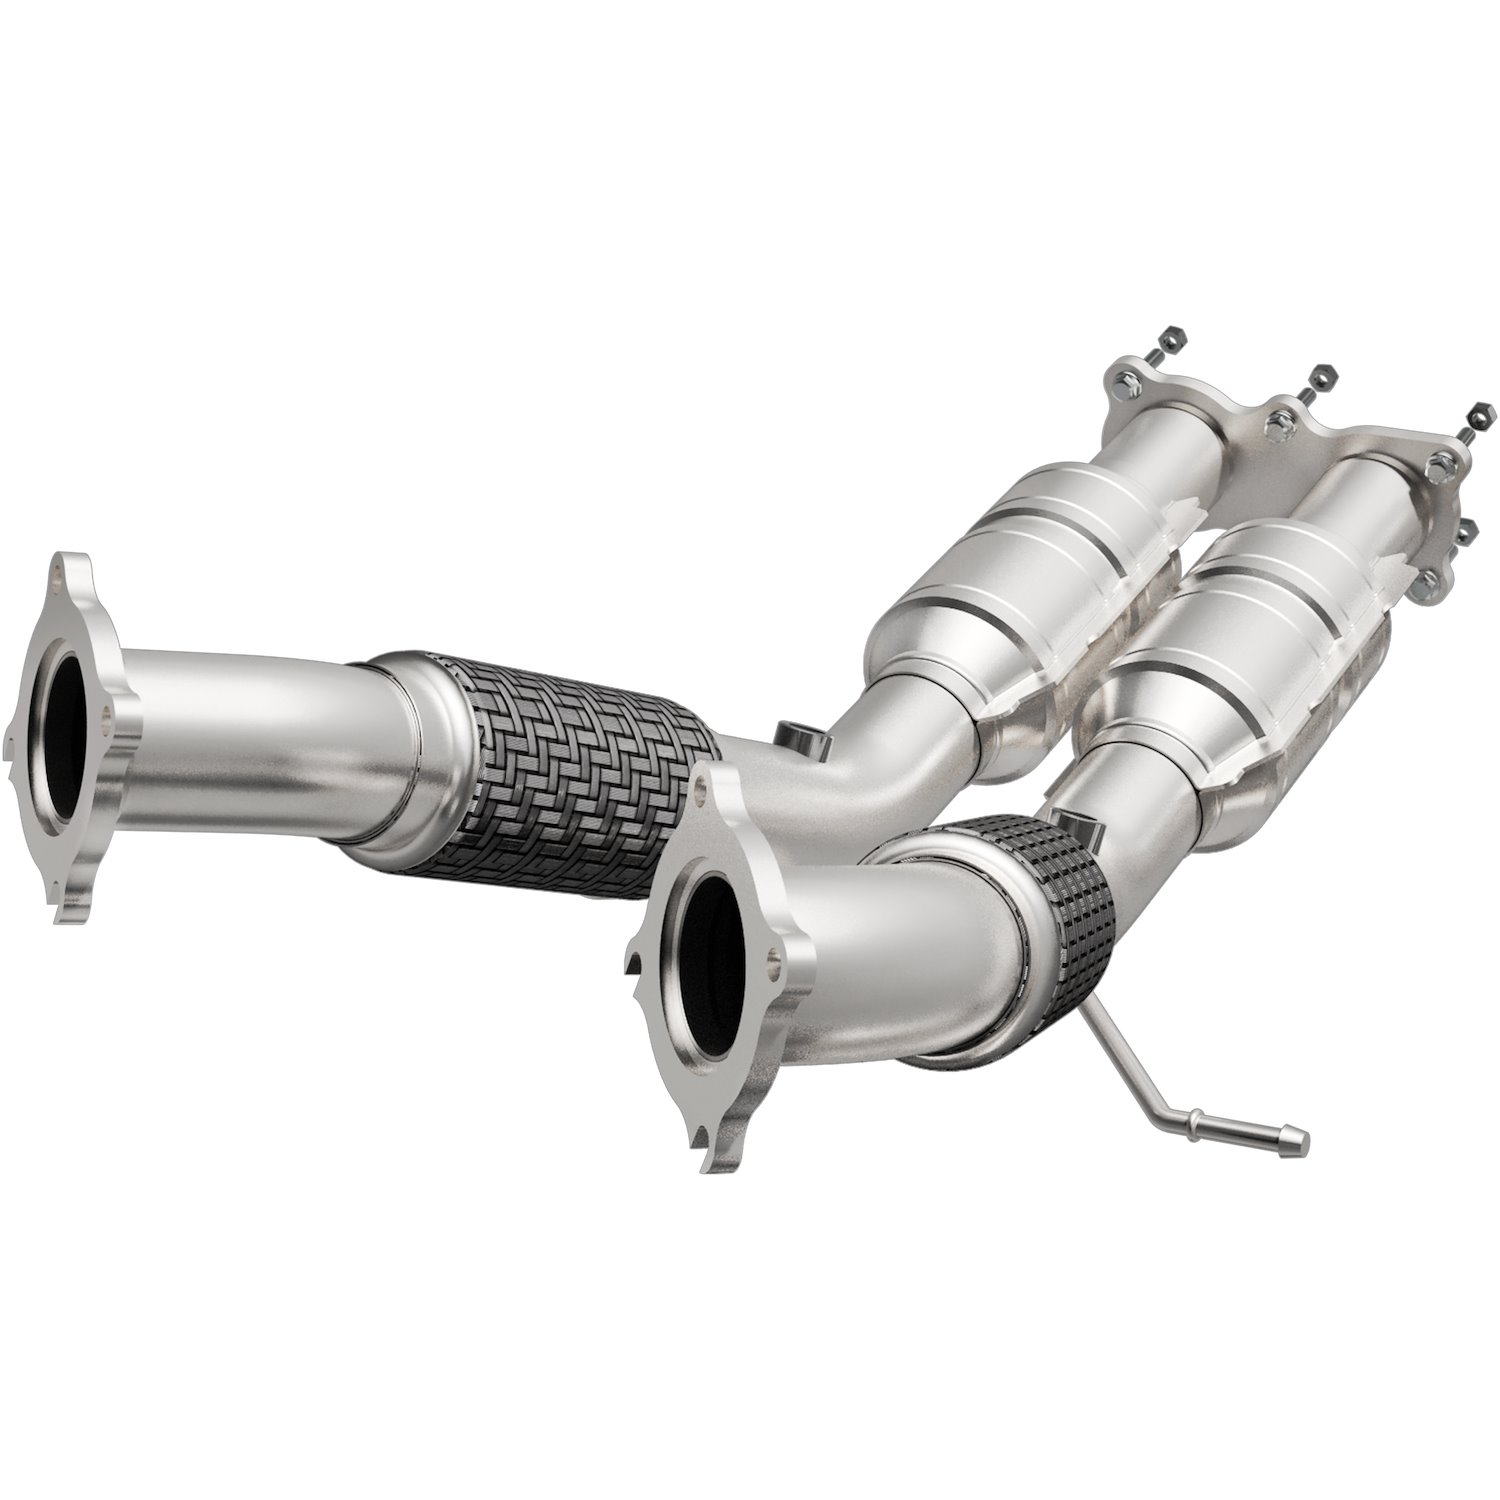 OEM Grade Federal / EPA Compliant Direct-Fit Catalytic Converter 51623